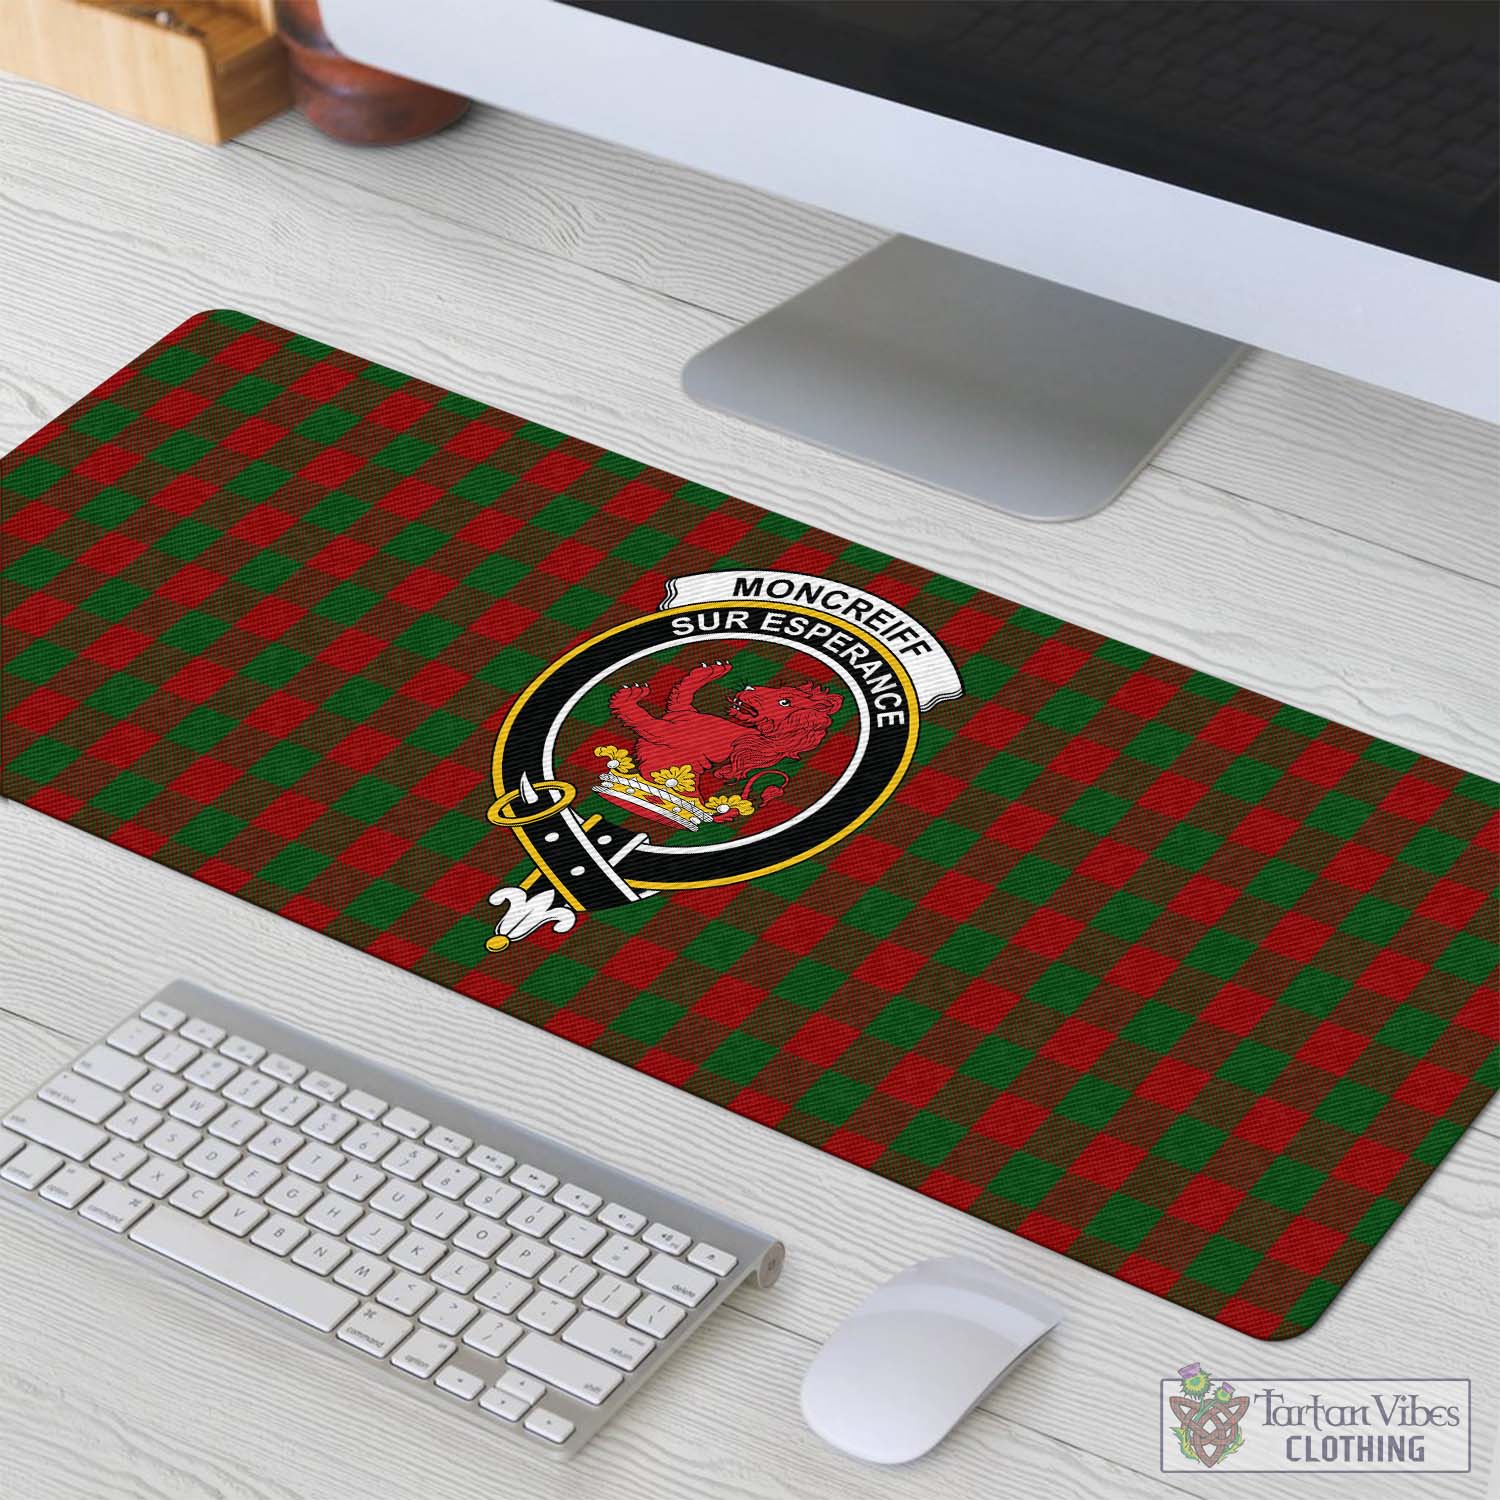 Tartan Vibes Clothing Moncrieff Tartan Mouse Pad with Family Crest